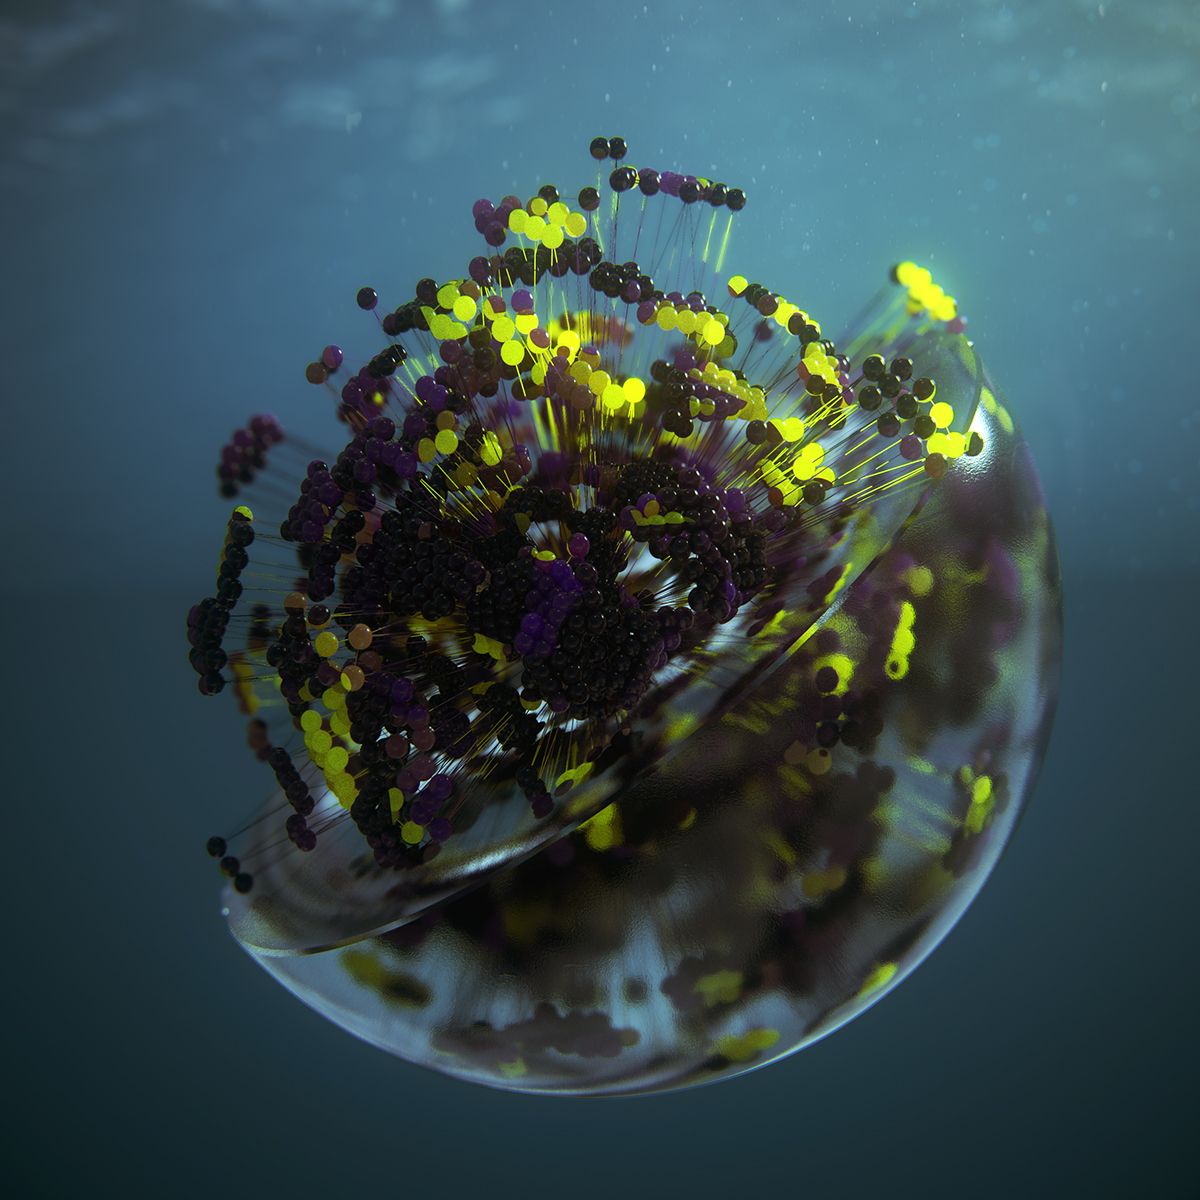 Corona for c4d VRay for C4D 365project 3D Render Ocean exploring the ocean after effects maxon adobe cinema 4d world machine everydays Daily Render